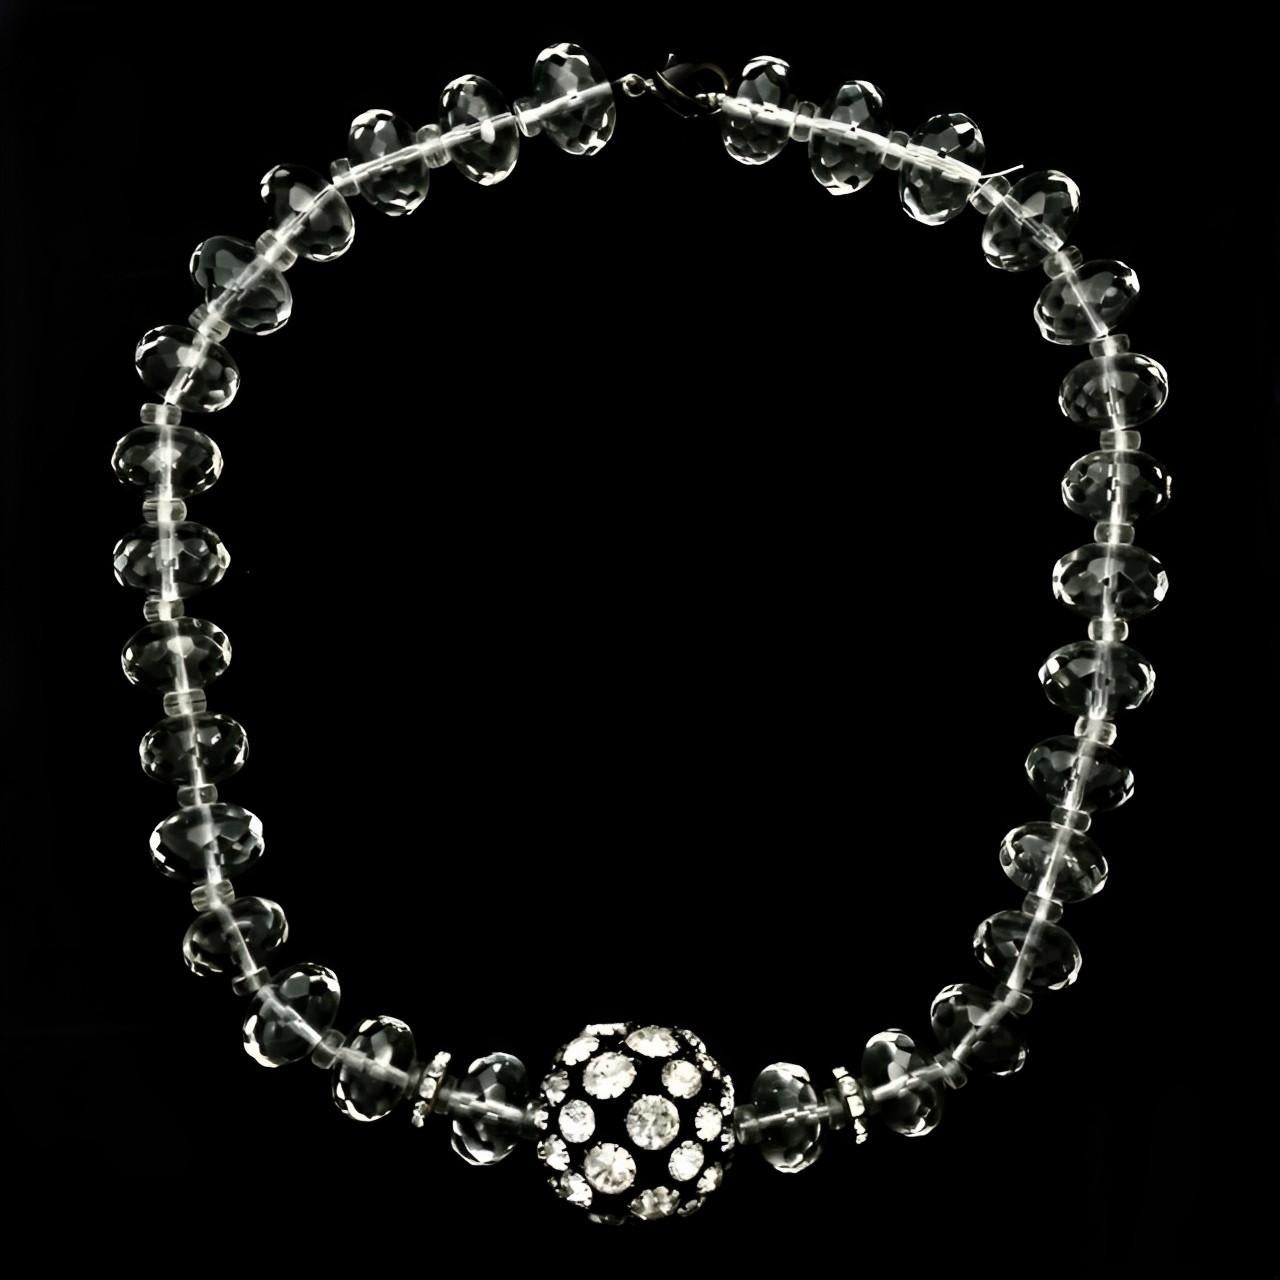 Clear Faceted Glass Beaded Necklace with Black Enamel and Crystal Ball For Sale 1